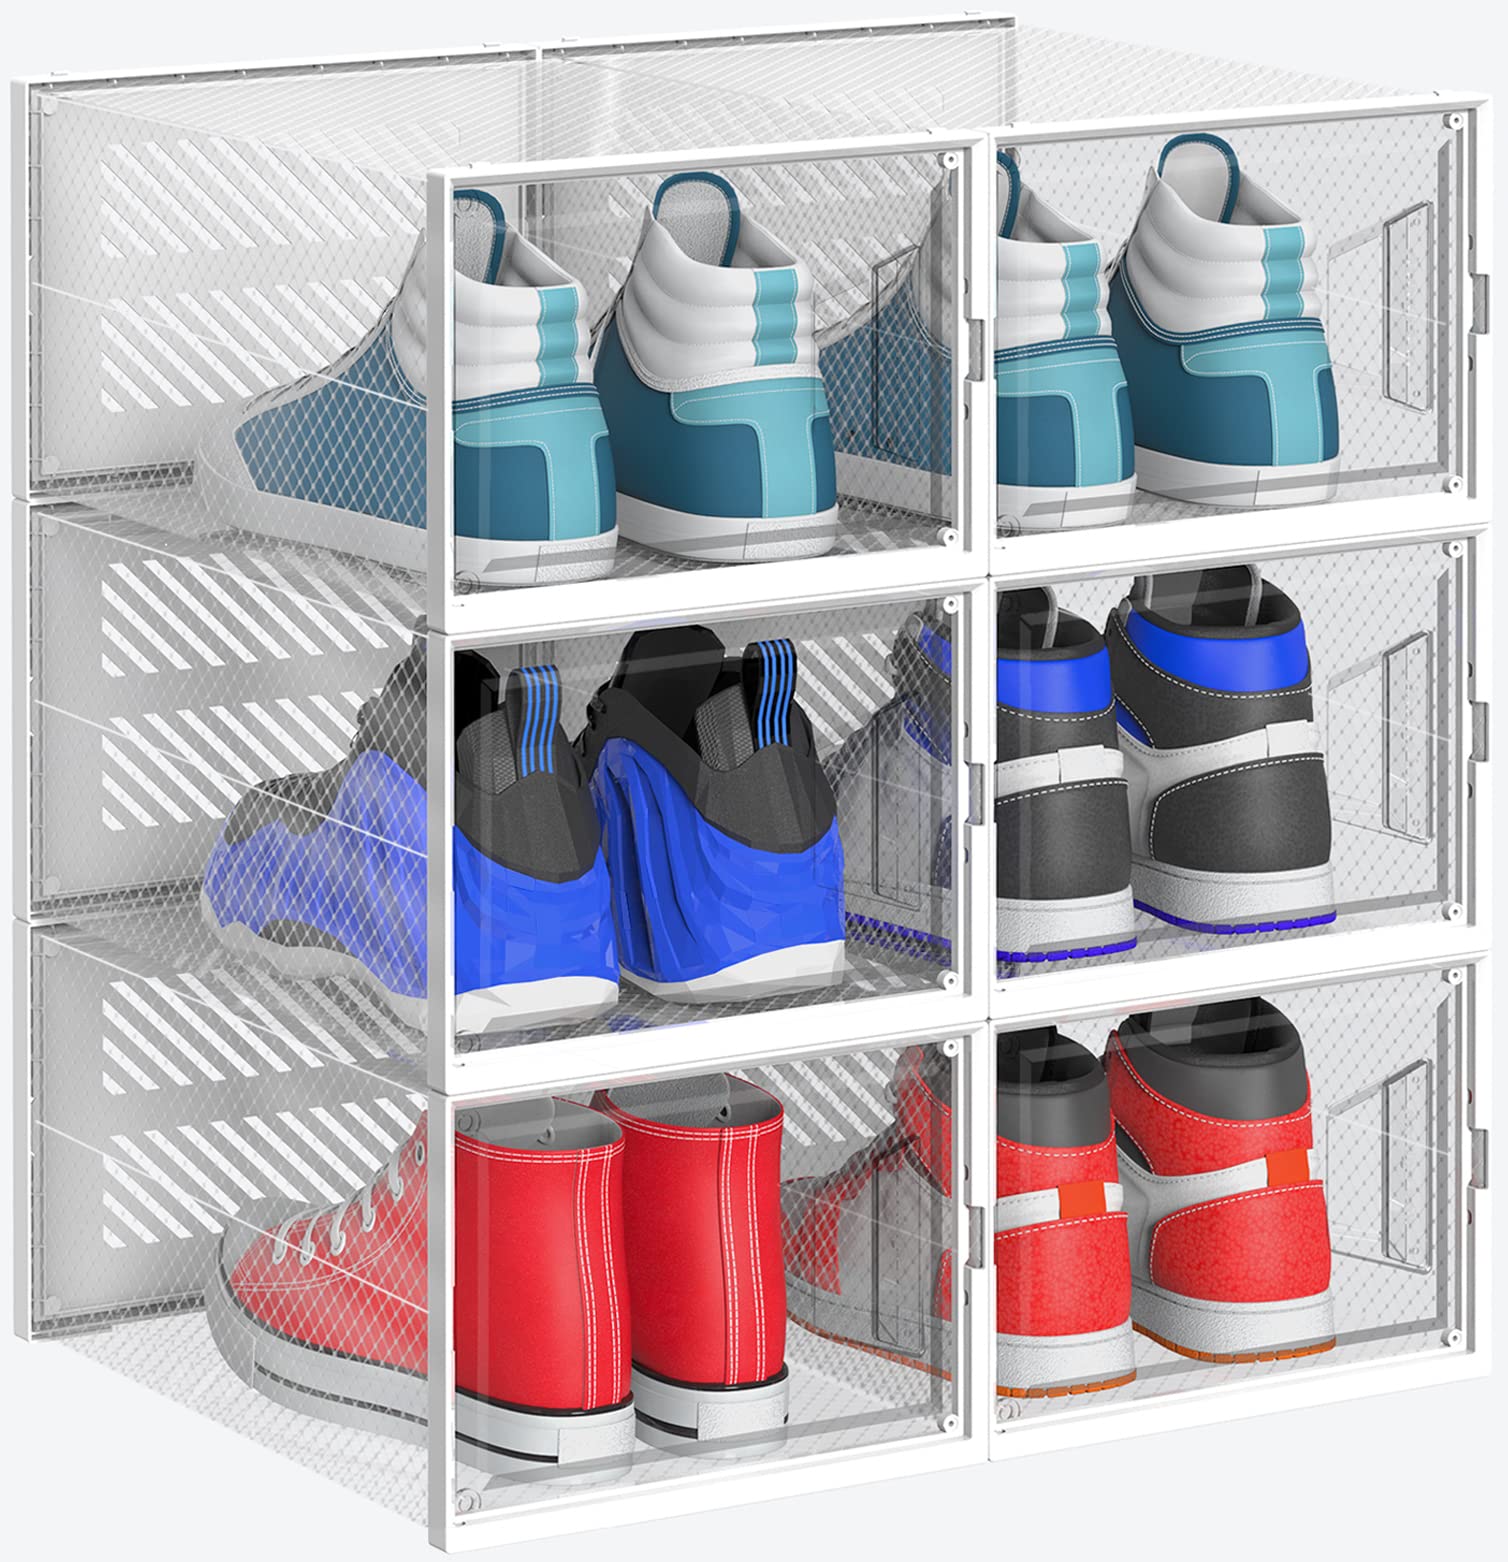 ateboane XX-Large Foldable Shoe Storage Boxes,6 Pack Shoe Boxes Clear Plastic Stackable,Shoe Organizer for Closet,Boot Storage,Sneaker Storage for Sneakerheads Fit for Men/Women US Size 14